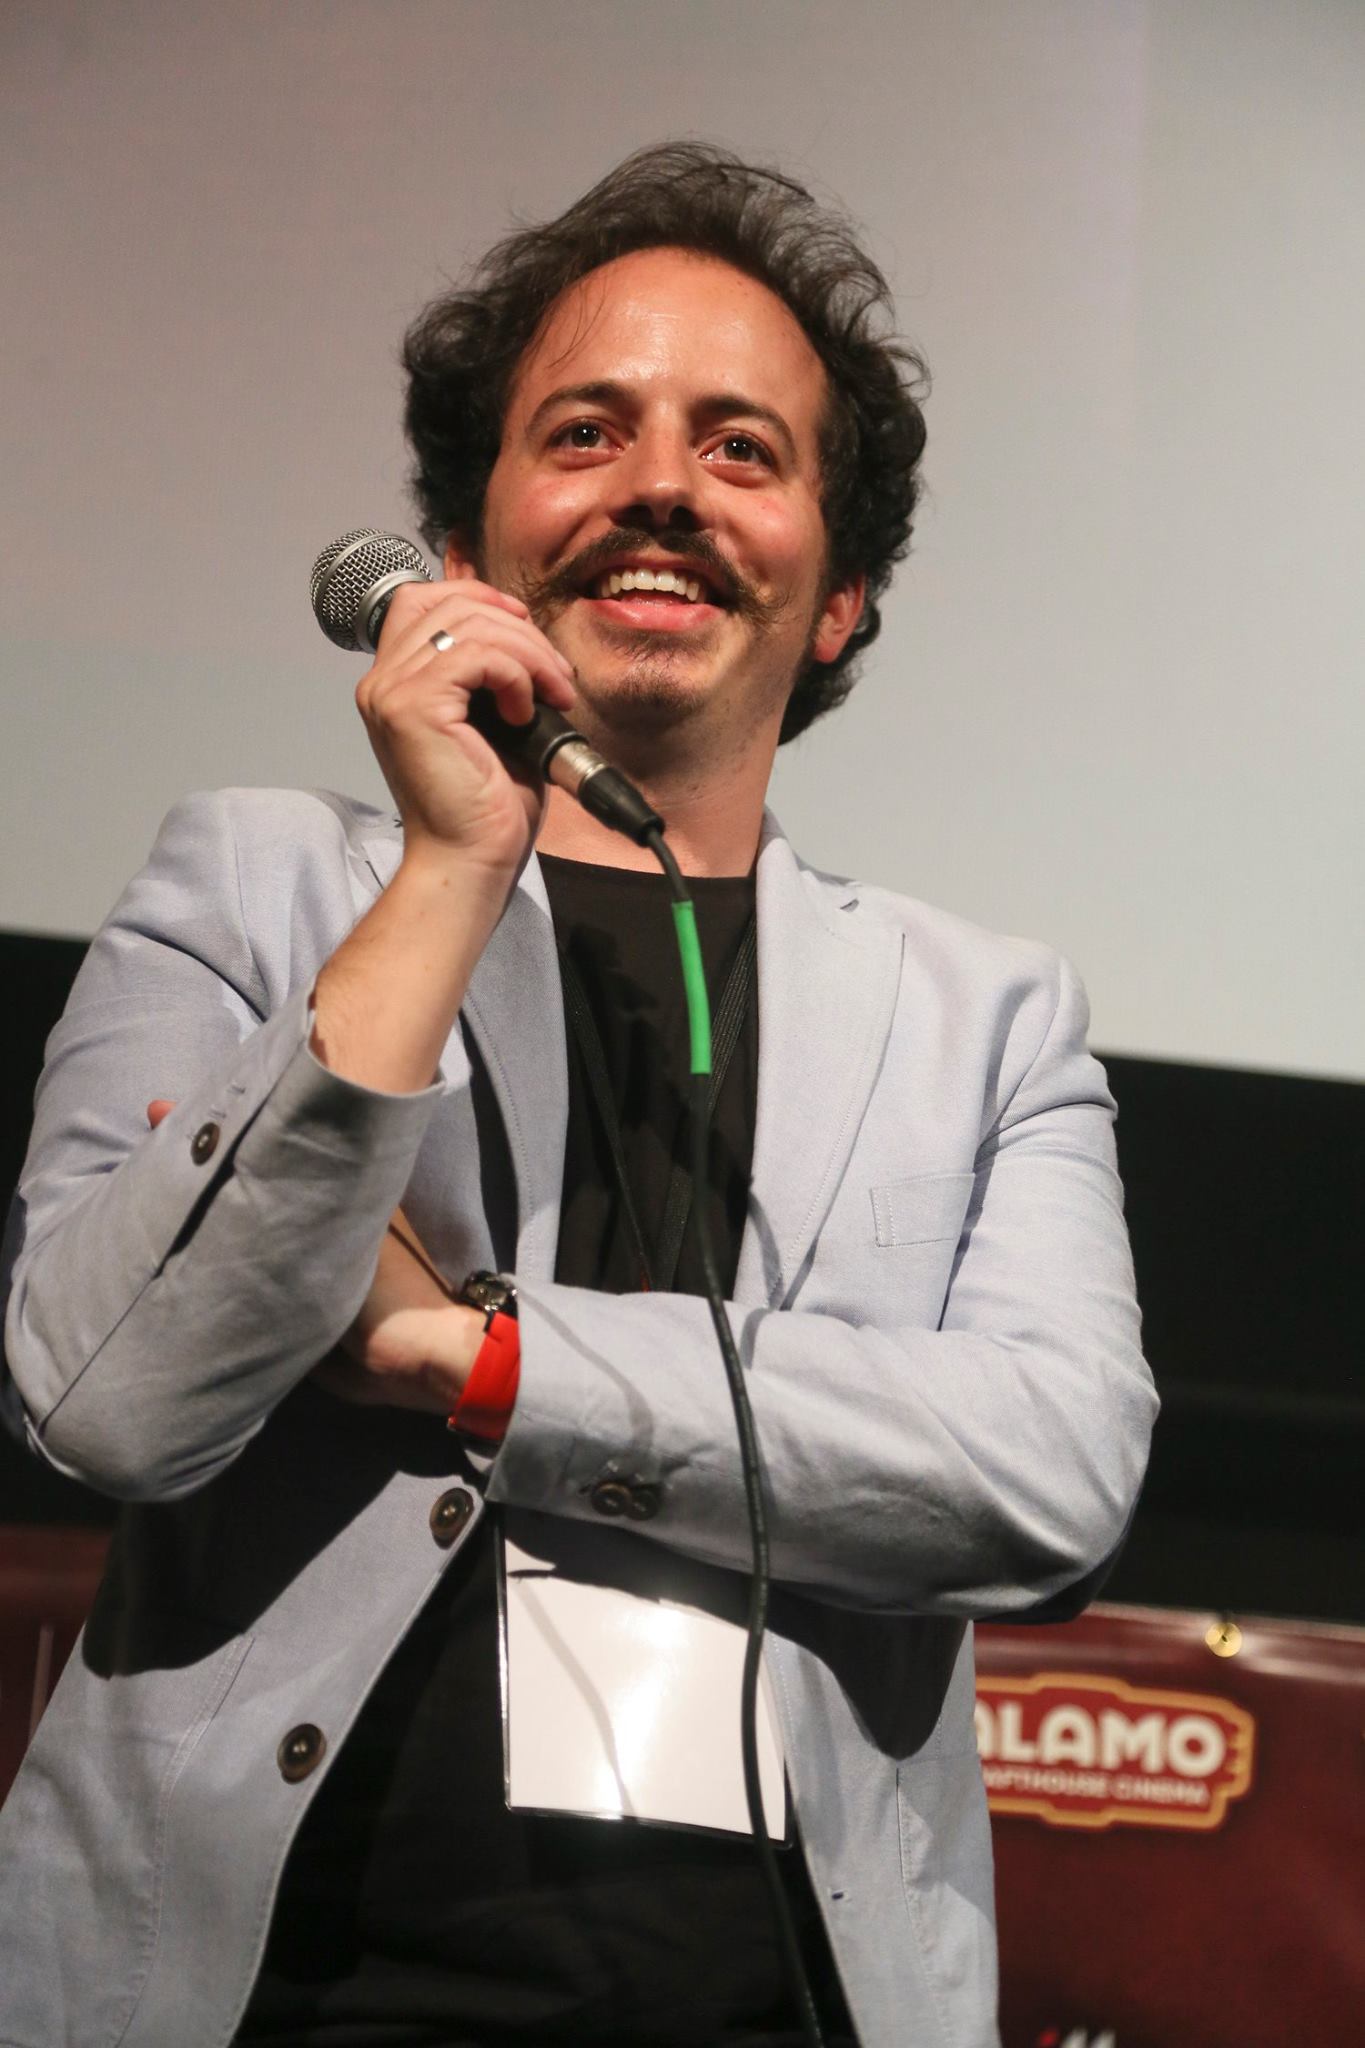 Isaac Ezban at the world premiere of his second feature film THE SIMILARS at Fantastic Fest 2015 (Austin, Texas, Sept 2015)